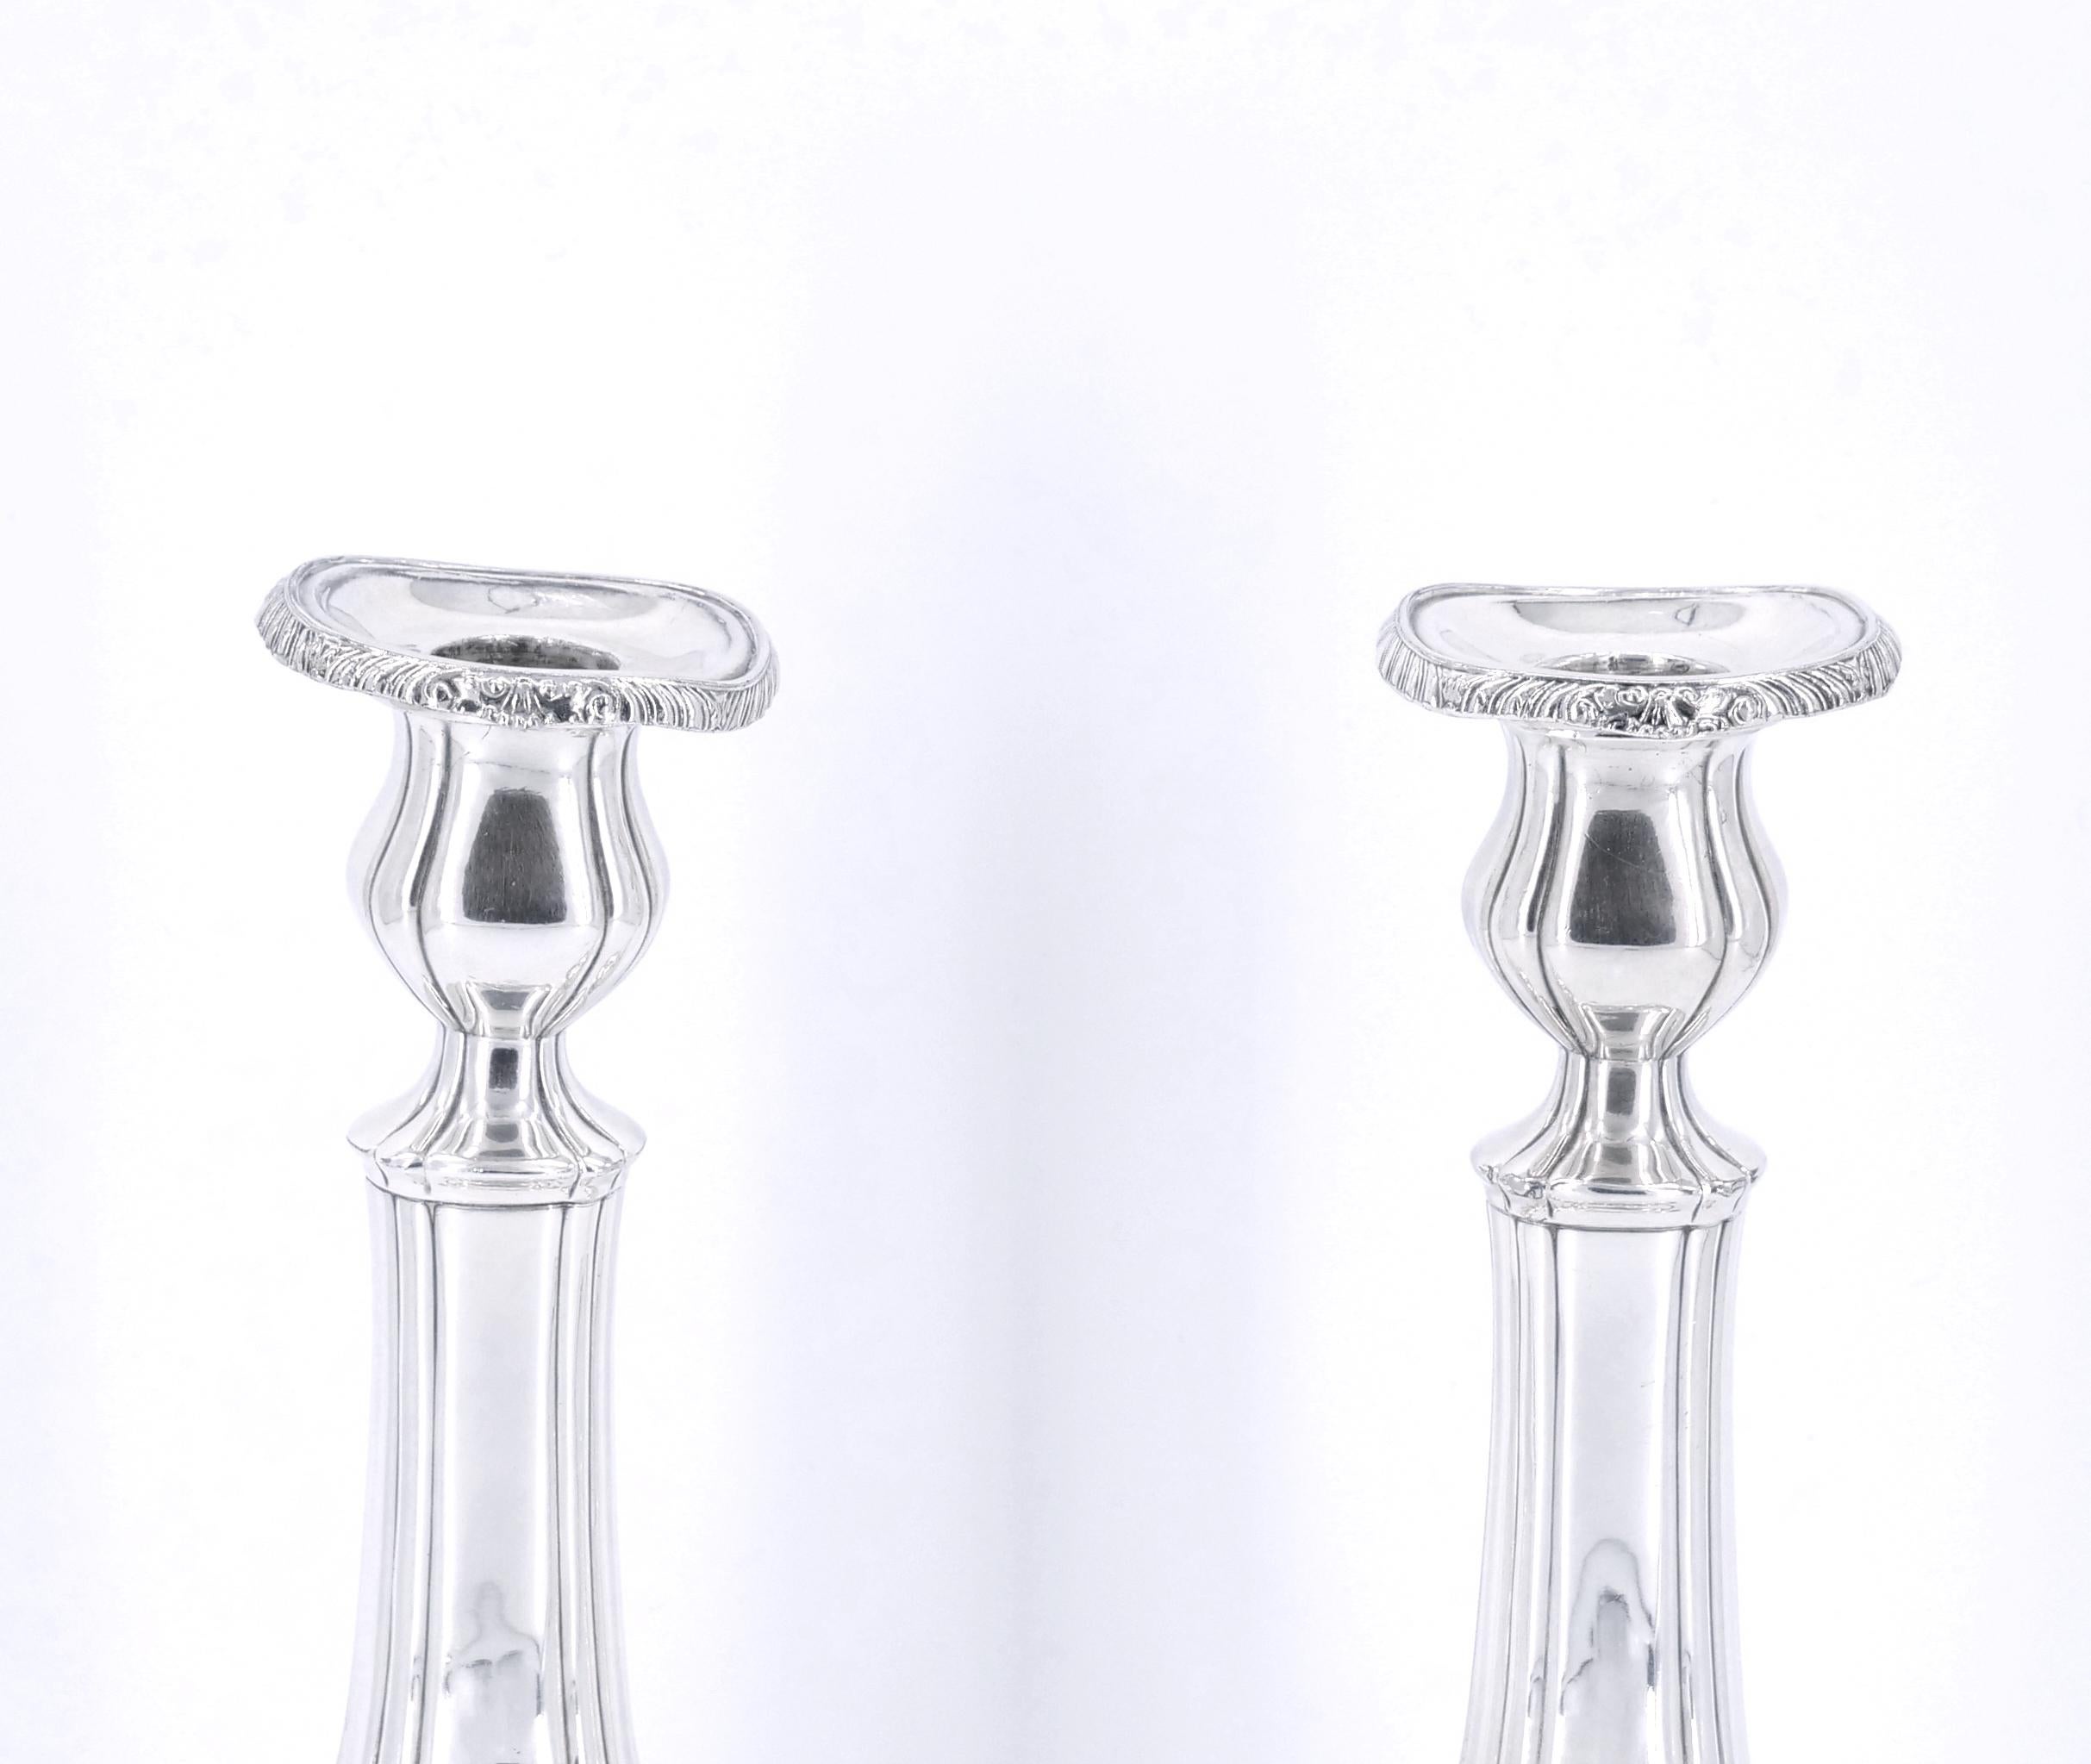 Pair of silverplate candlesticks by Gorham with hand engraved designs in the English Regency style. Each in very good condition with slight bends to one bobeche. Each currently well polished and ready to display. Underside signed with the Gorham